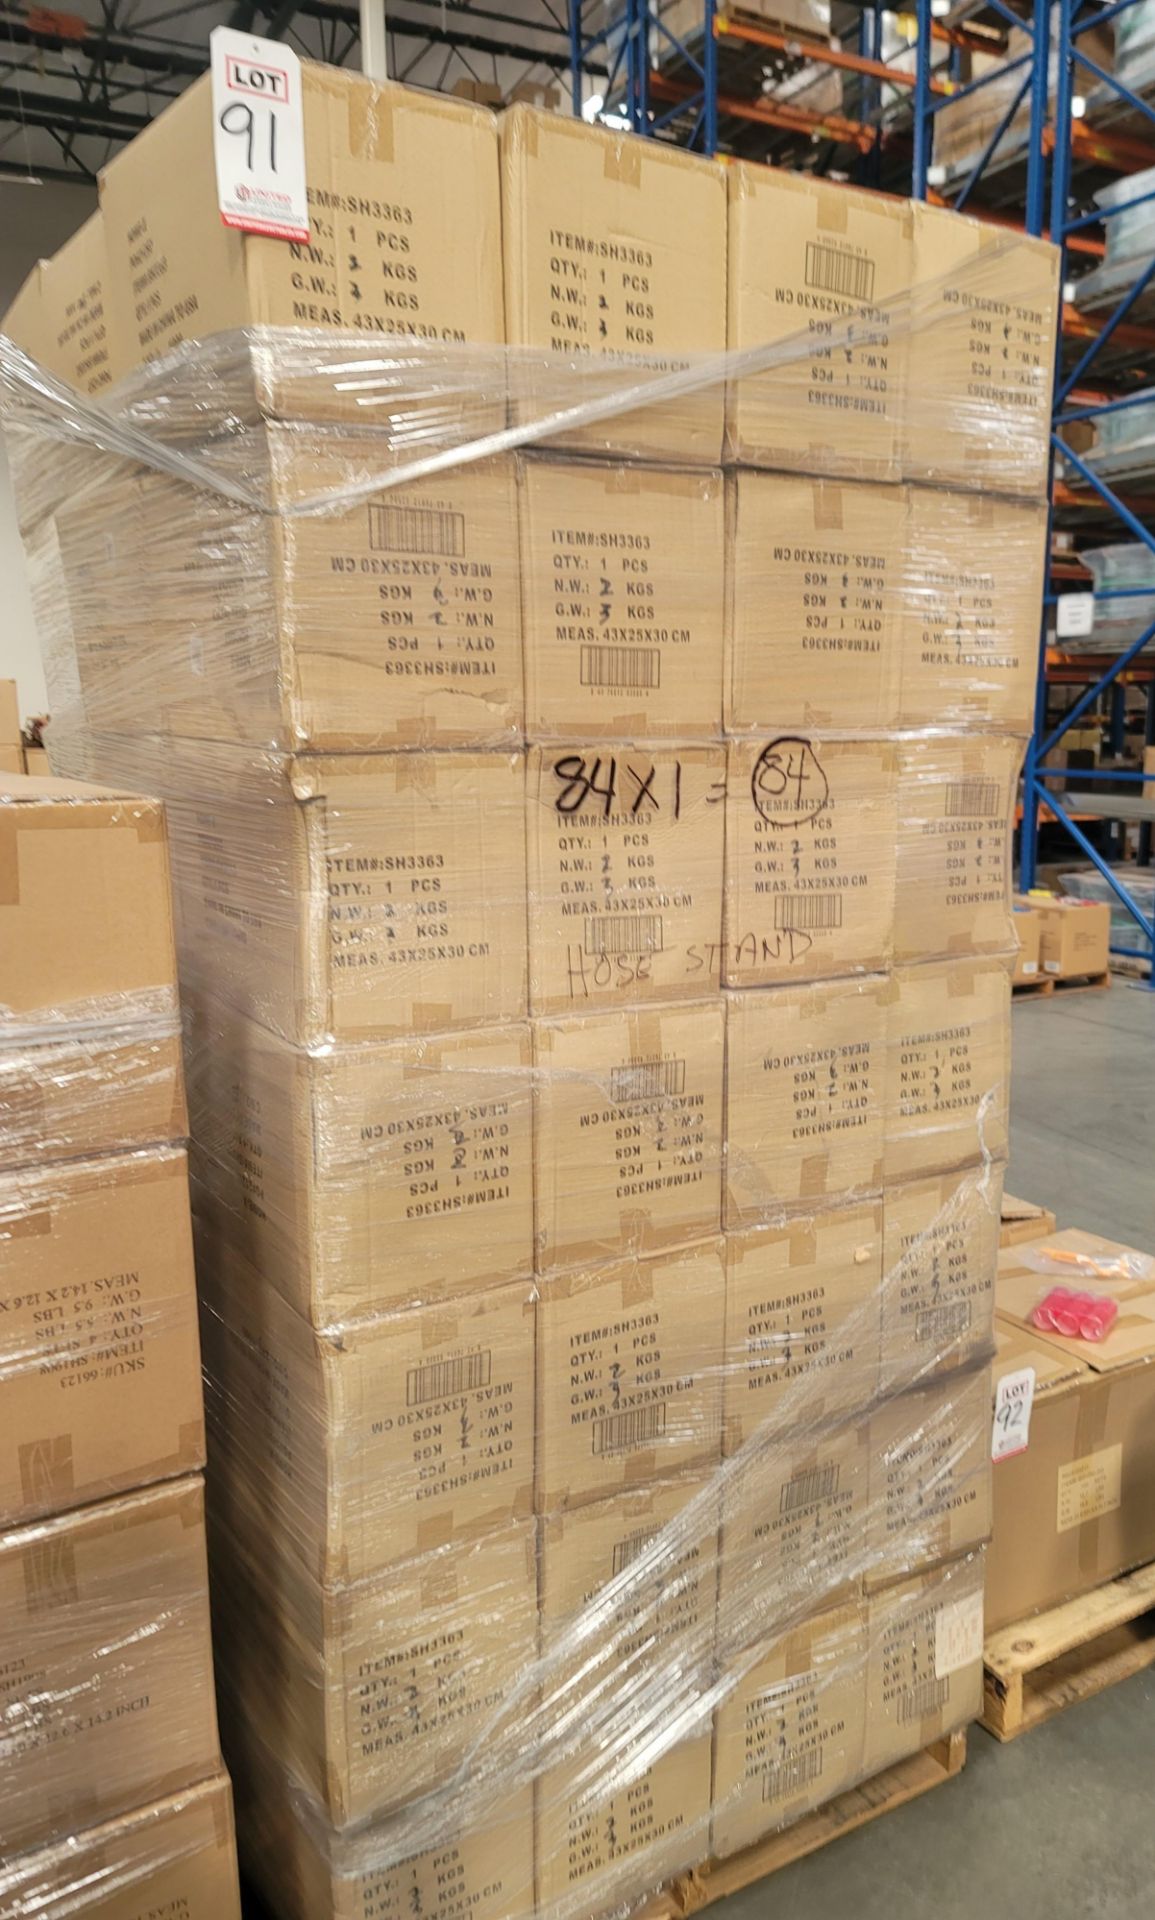 LOT - PALLET OF (84) IN-GROUND GARDEN HOSE STAND, (84 CASES/1 PER CASE) - Image 3 of 3